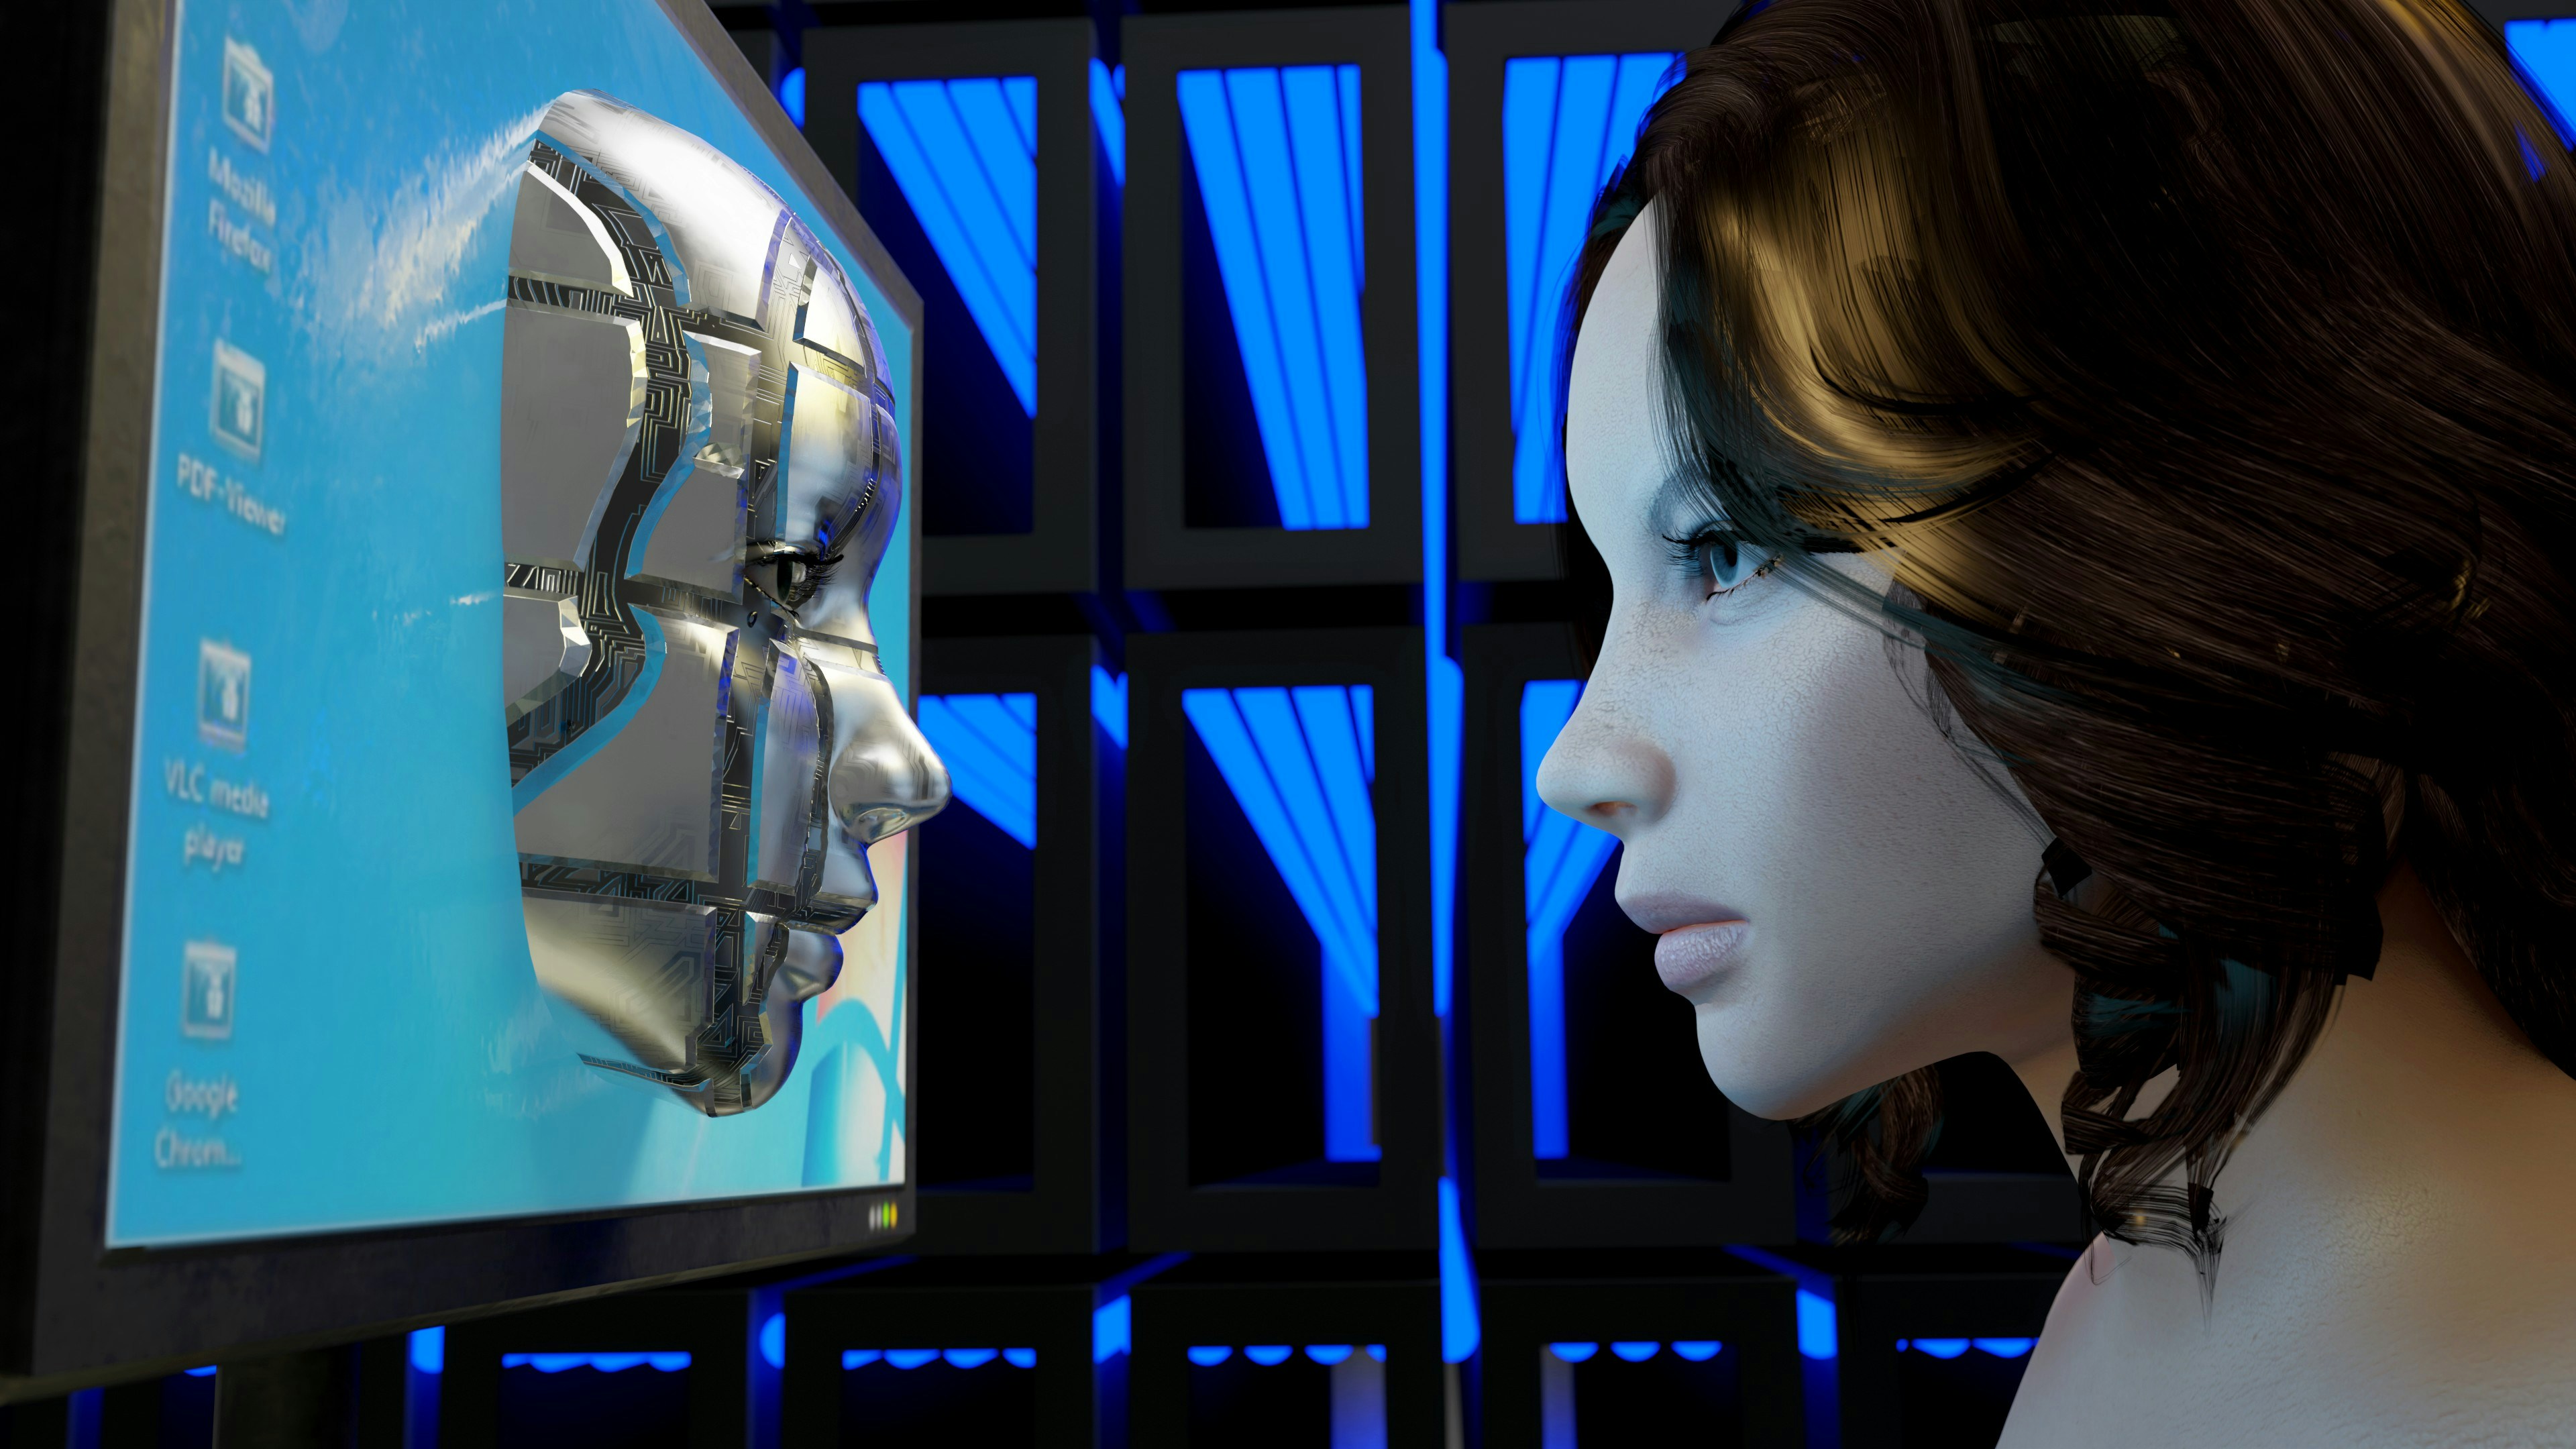 Woman looking at computer screen and robot emerging from the screen.